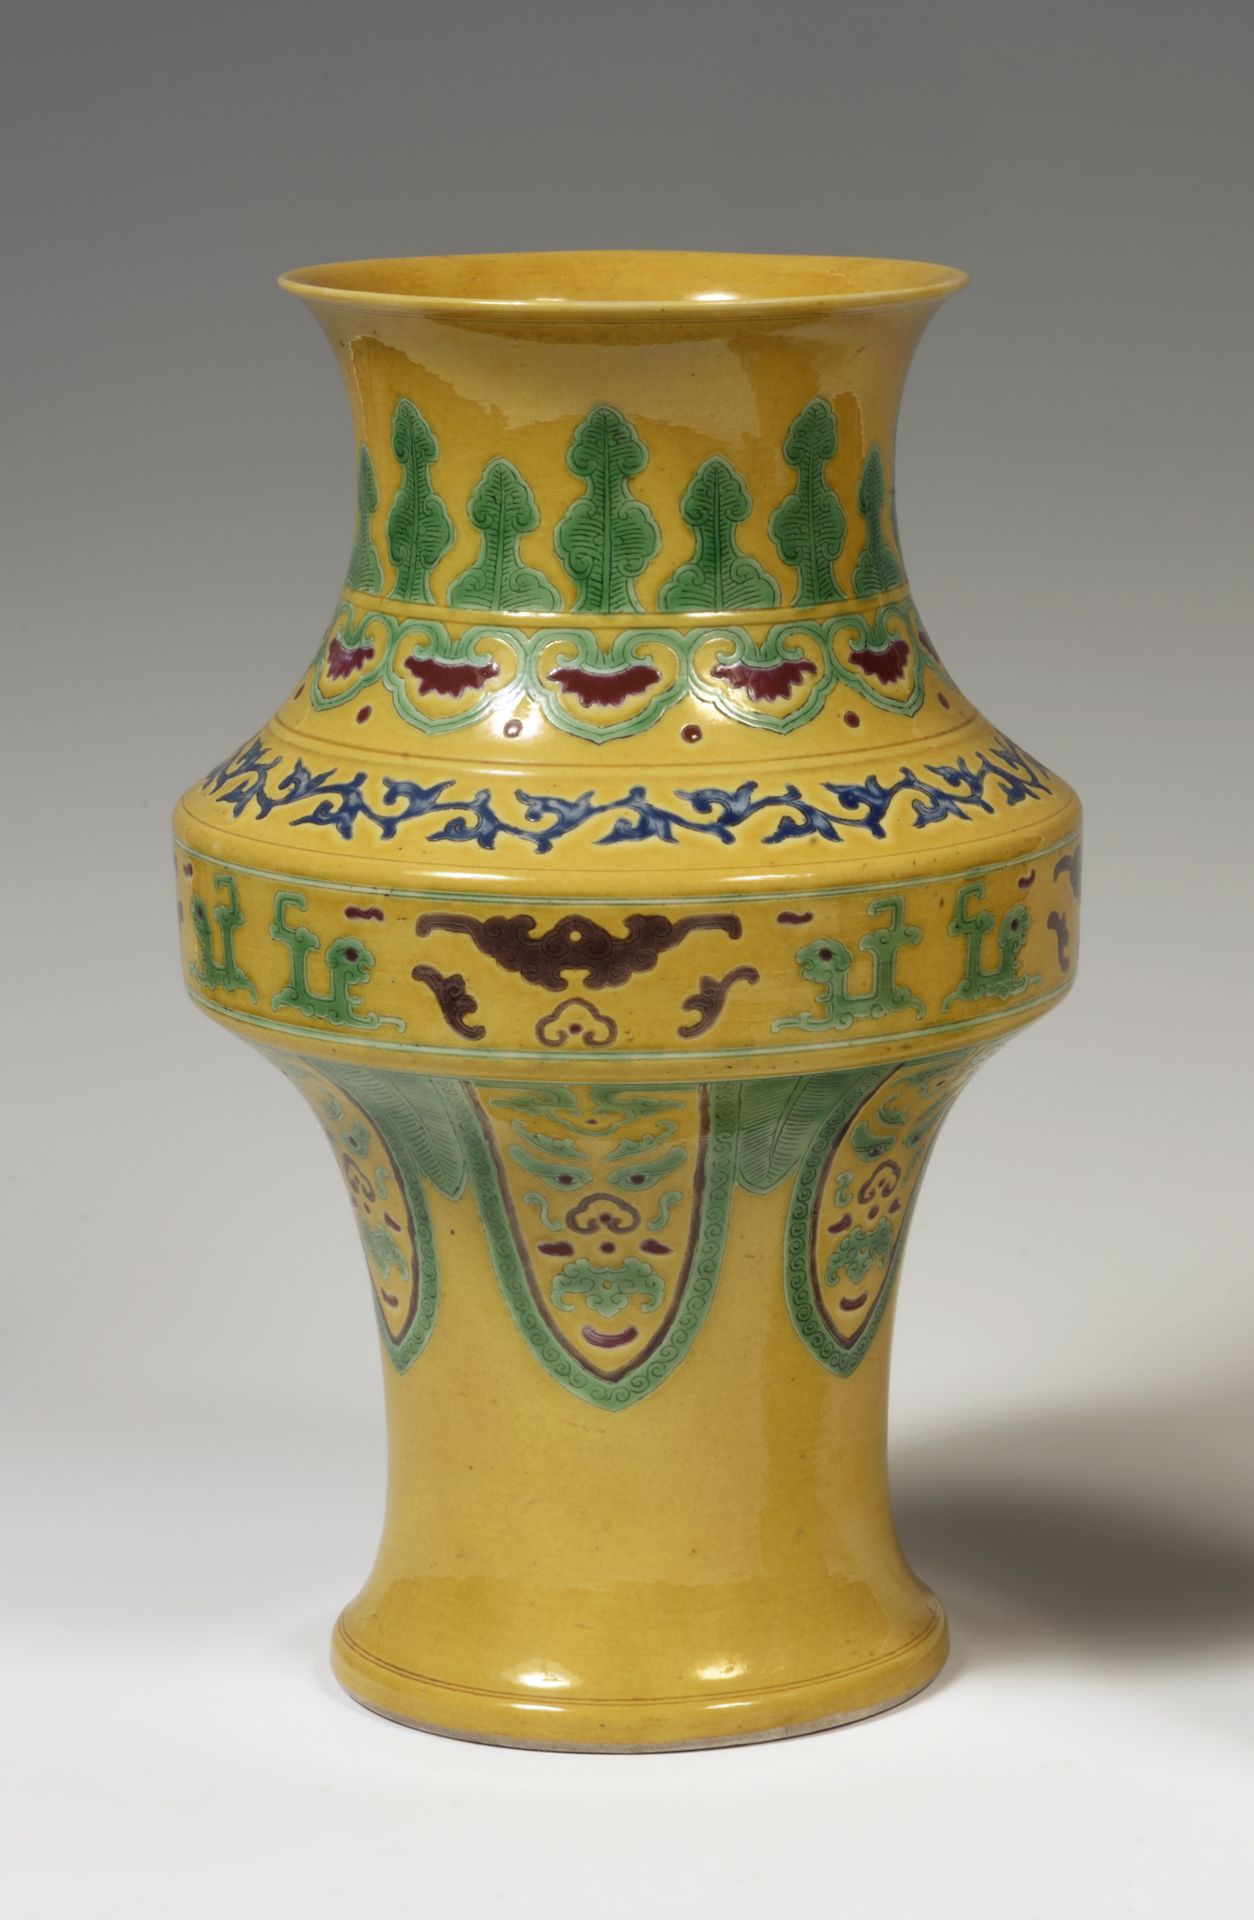 Null 
China

A yellow, blue, green and brown enamelled biscuit baluster vase wit&hellip;